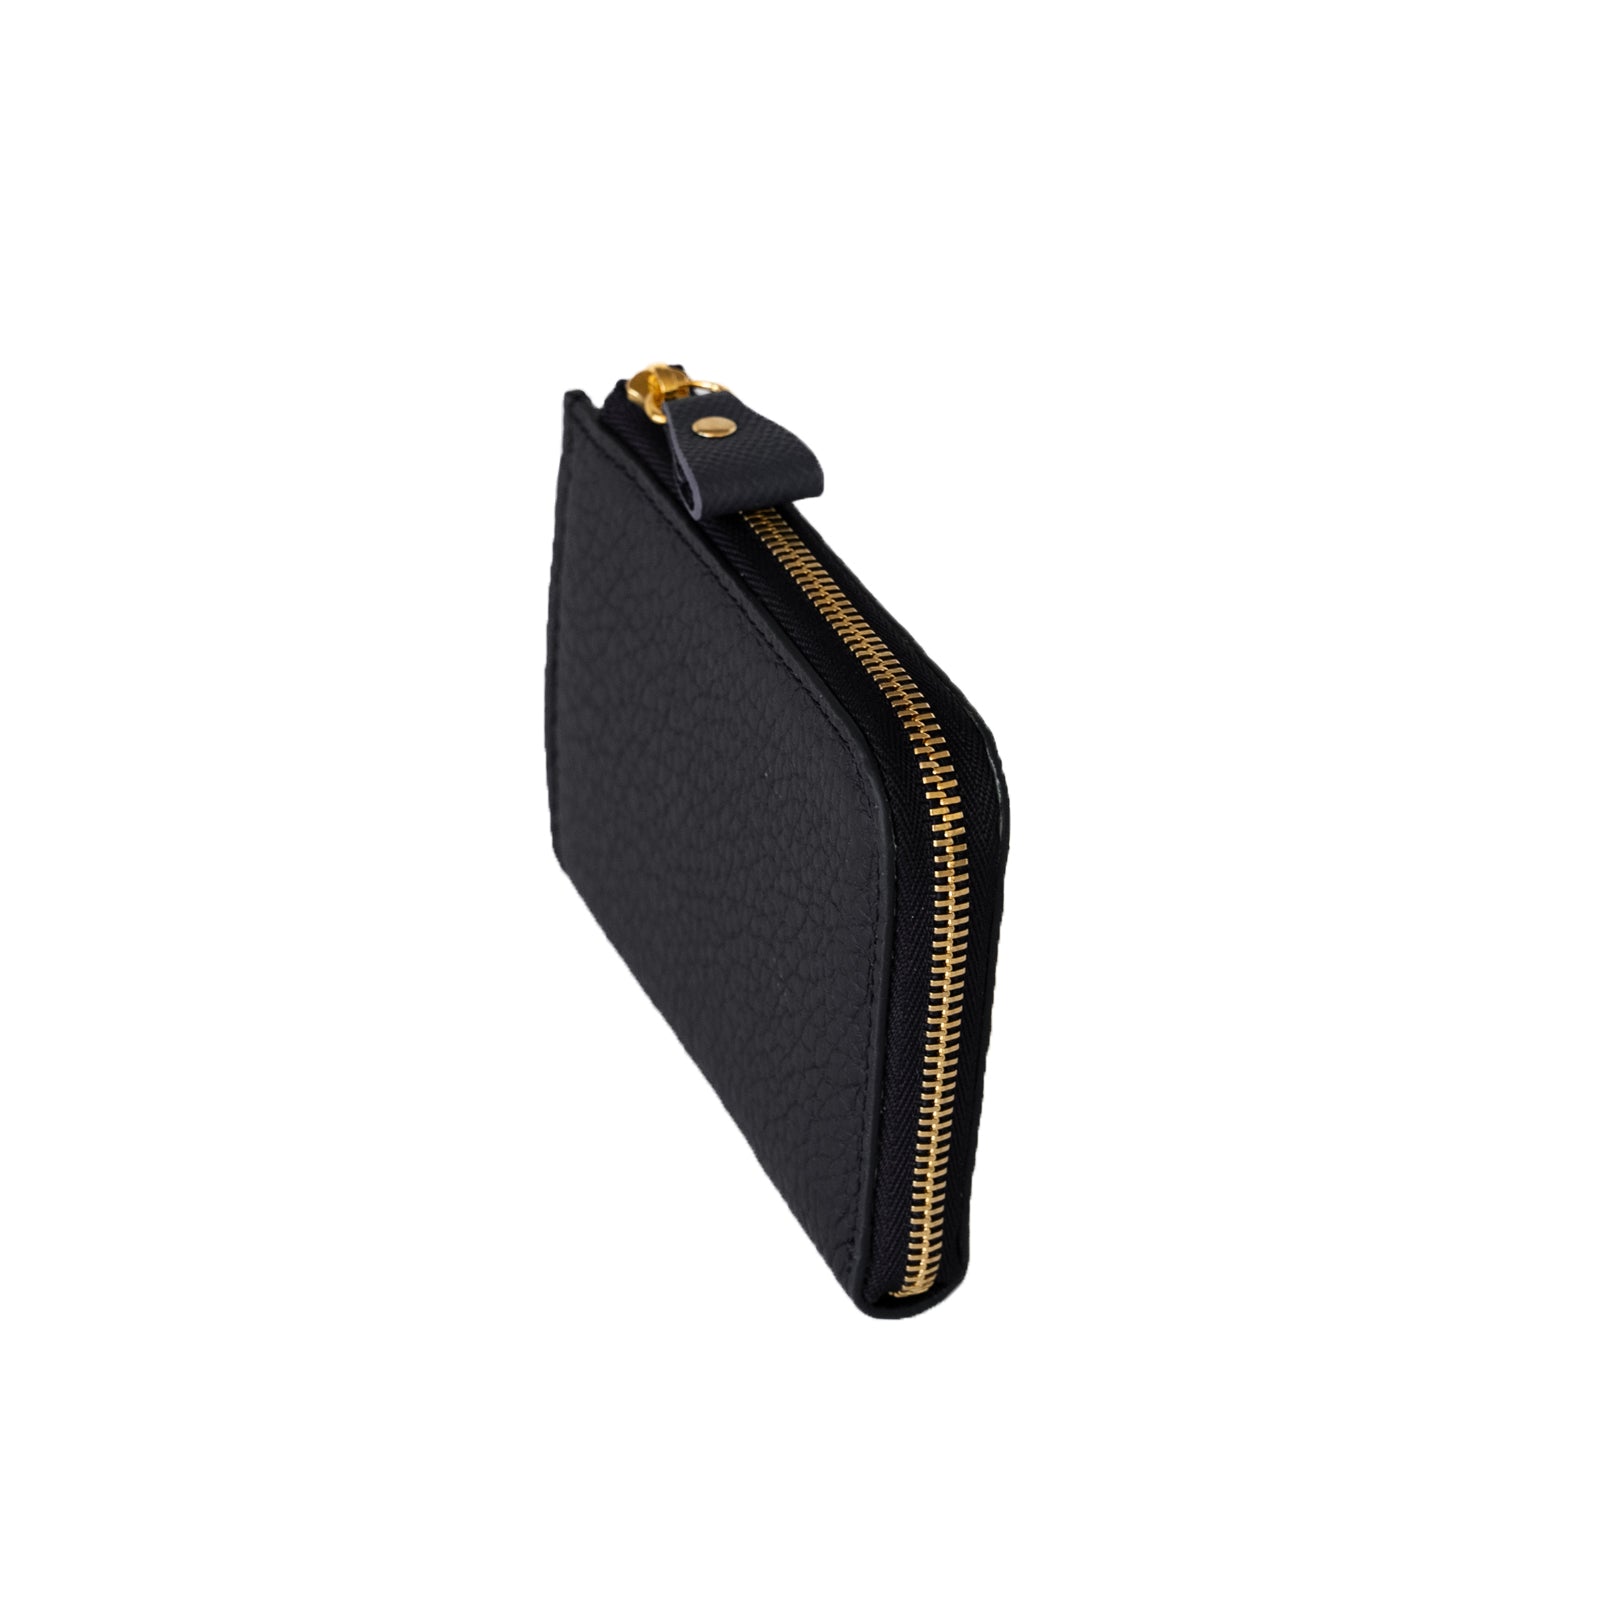 Minimum wallet with L shaped fastener / Taurillon Clemence